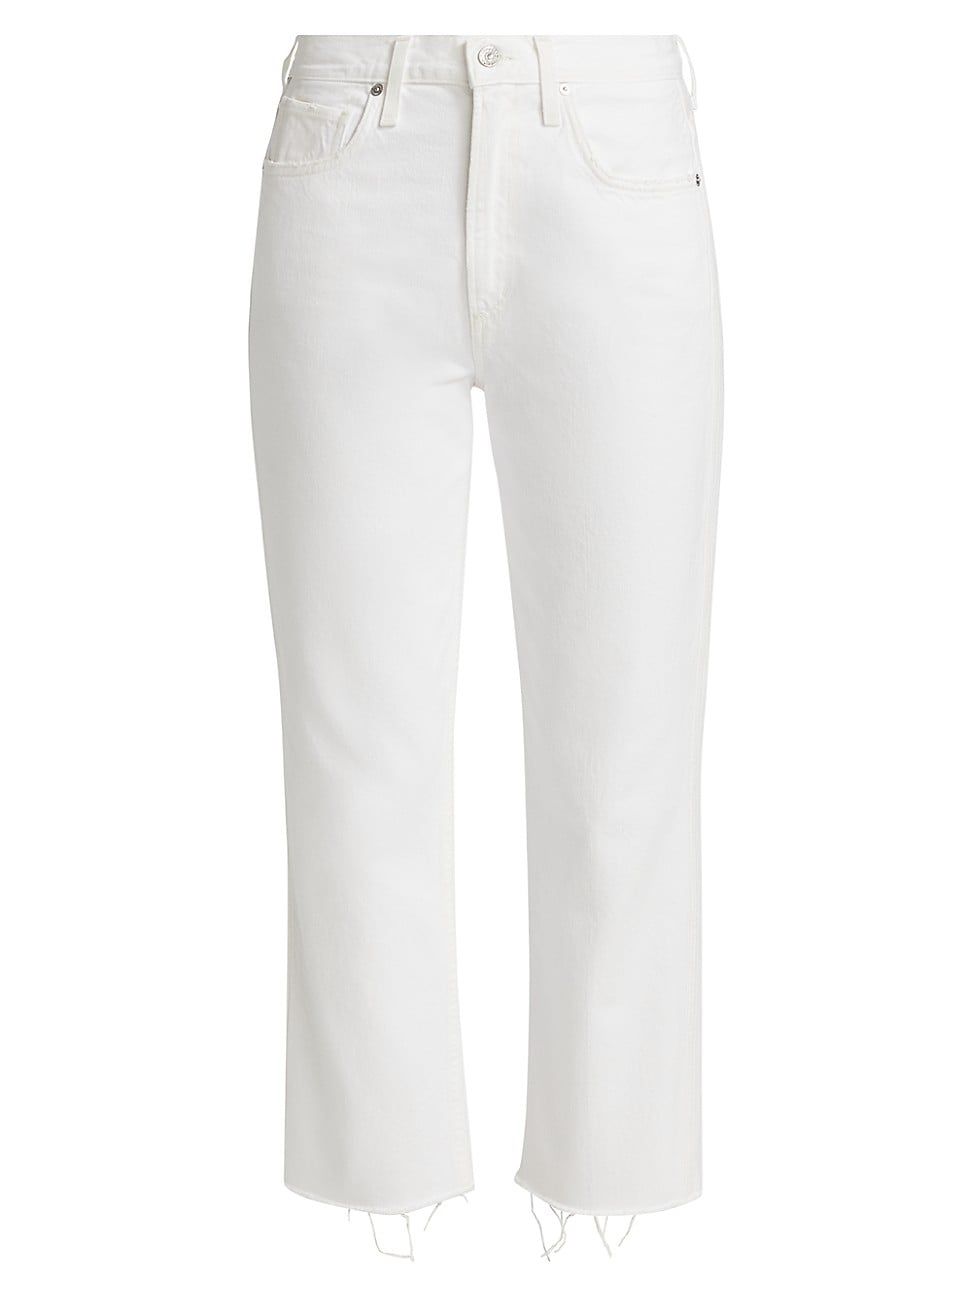 Citizens of Humanity Daphne Cropped White Jeans | Saks Fifth Avenue